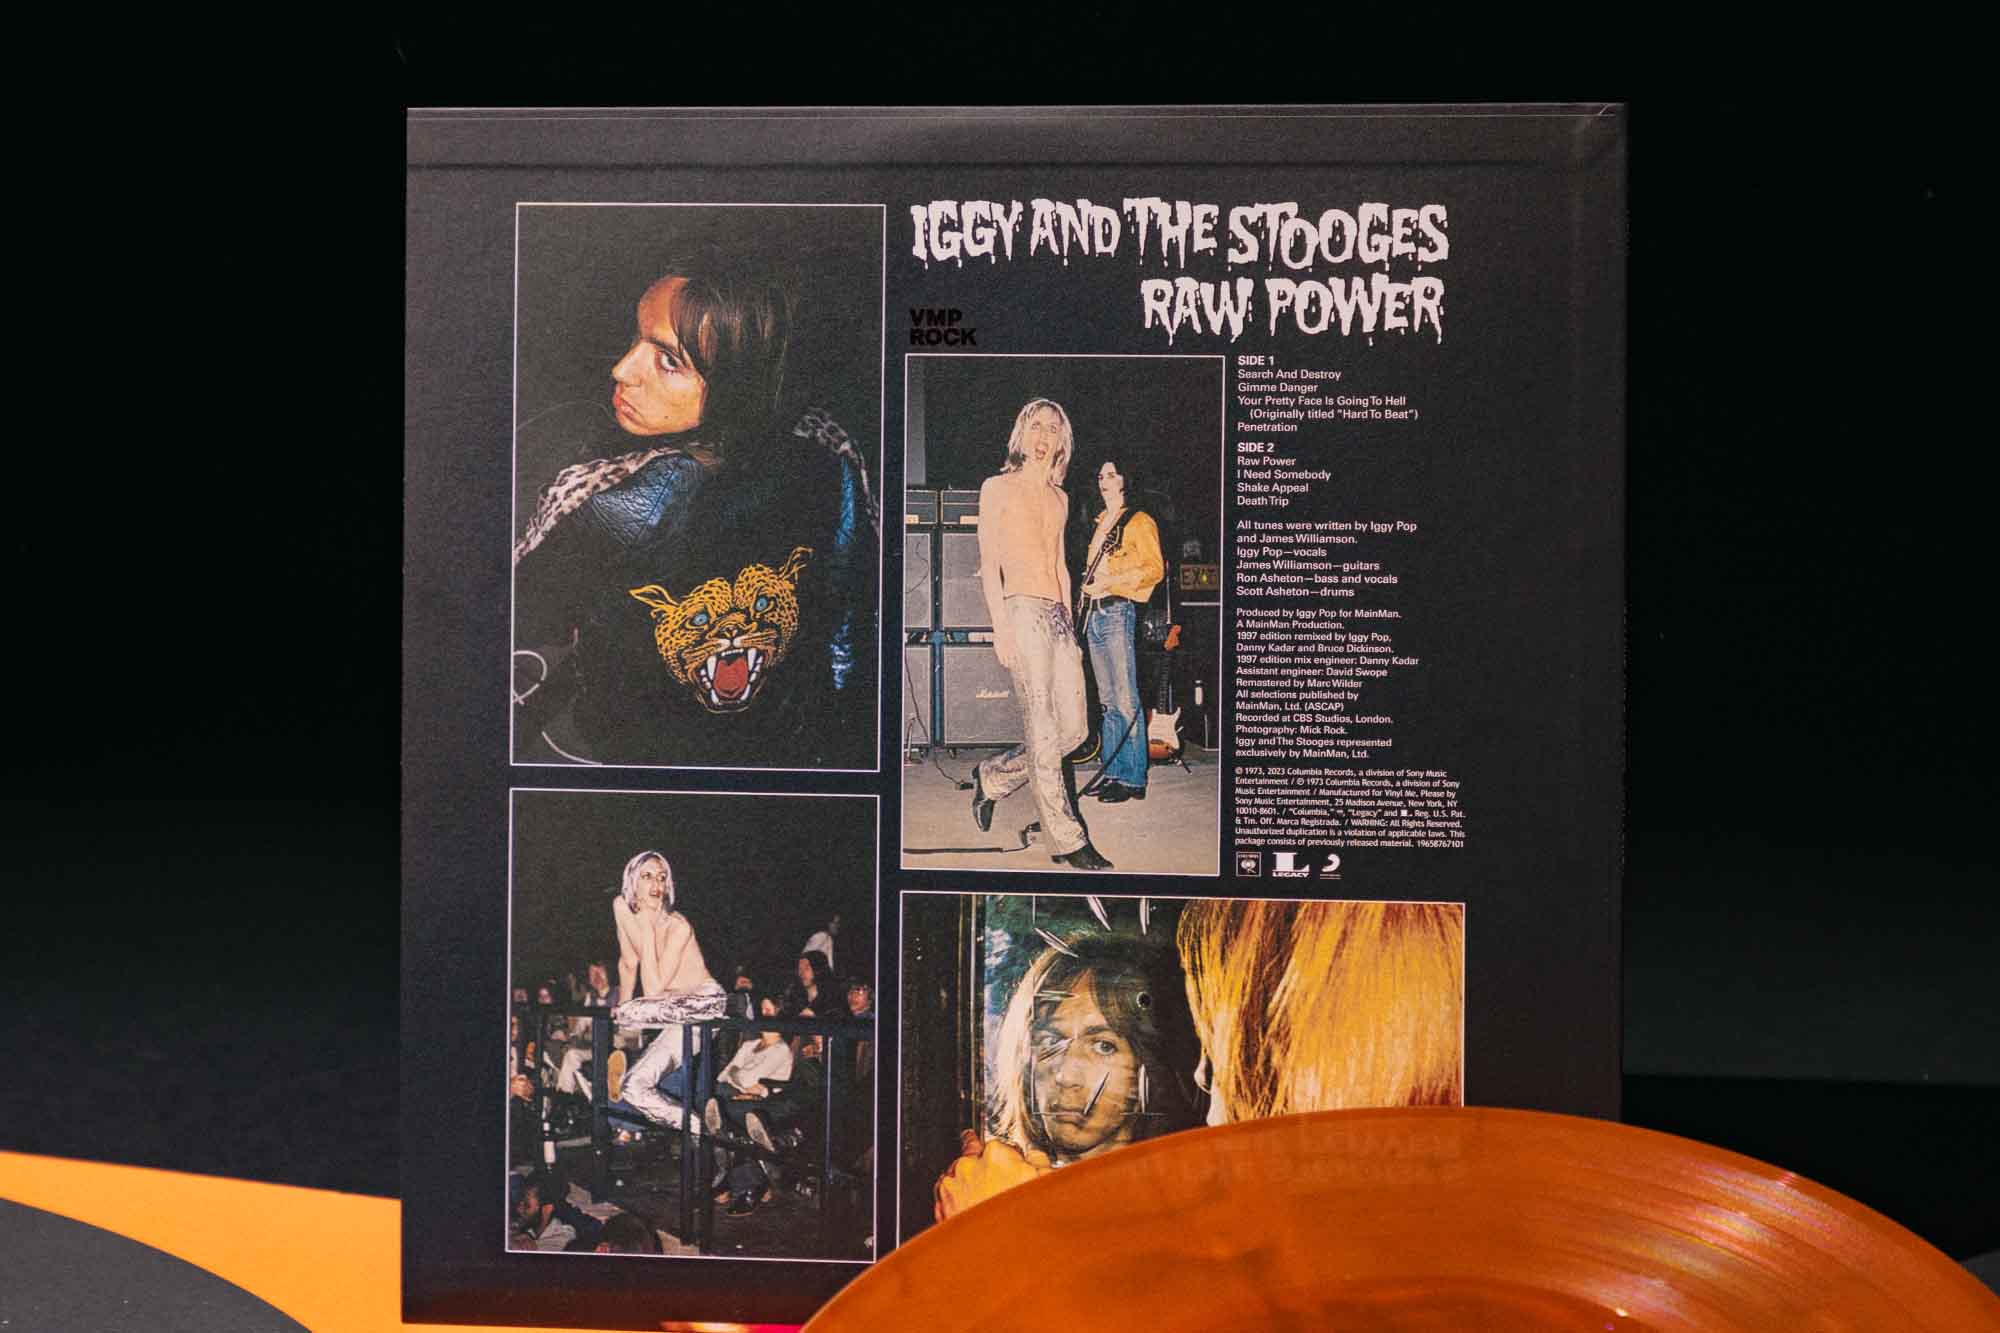 Iggy and The Stooges 'Raw Power' - Vinyl Me, Please